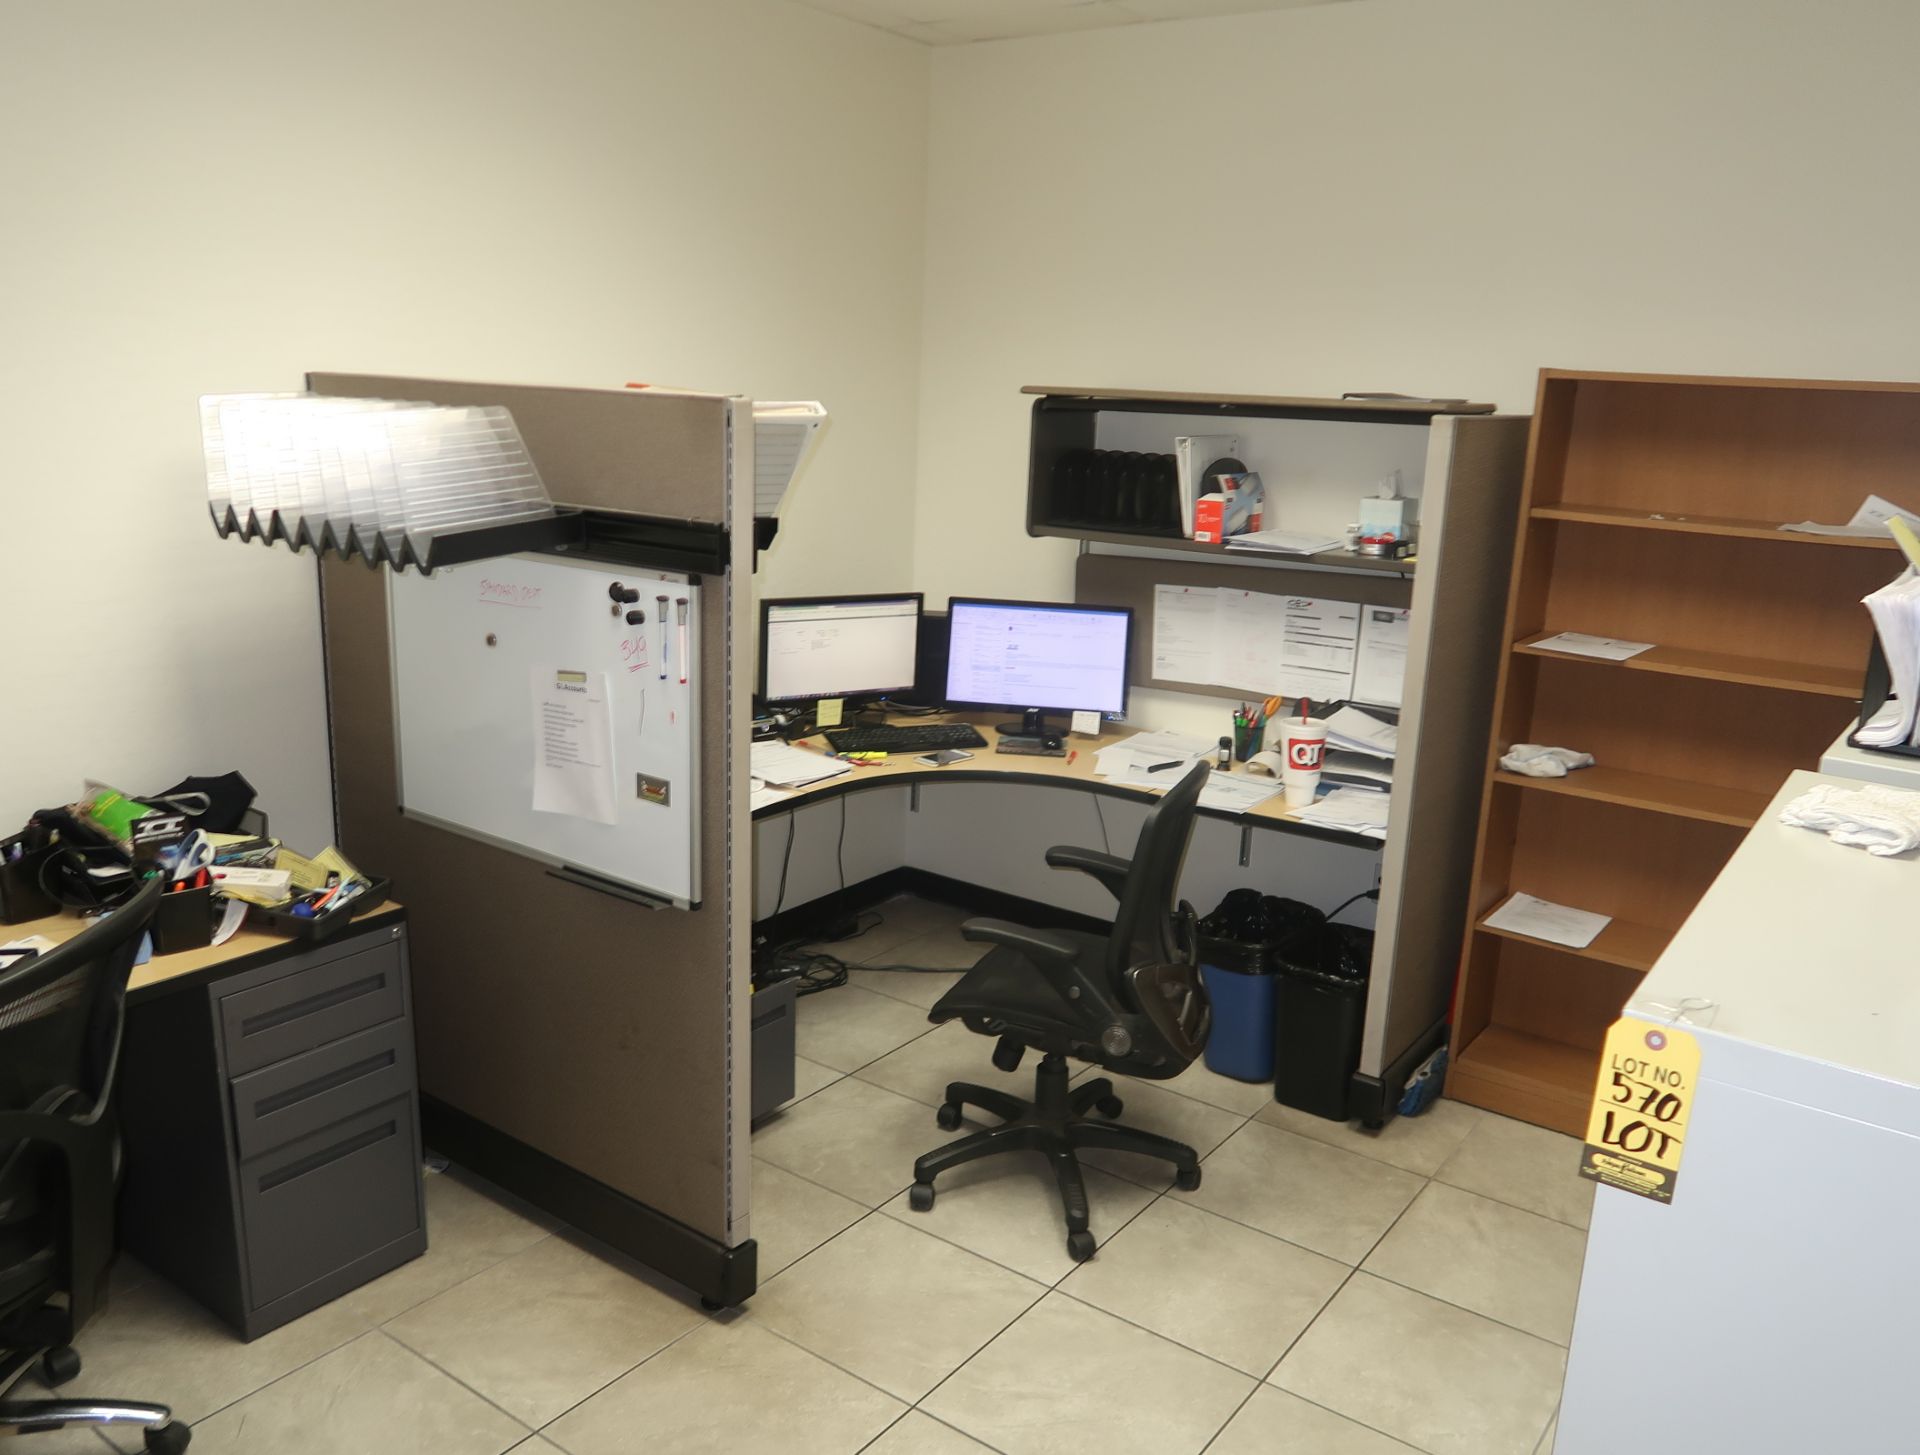 FILING CABINETS, BOOKCASE, CUBICLE WALLS, DESK, CHAIRS (NO ELECTRONICS)